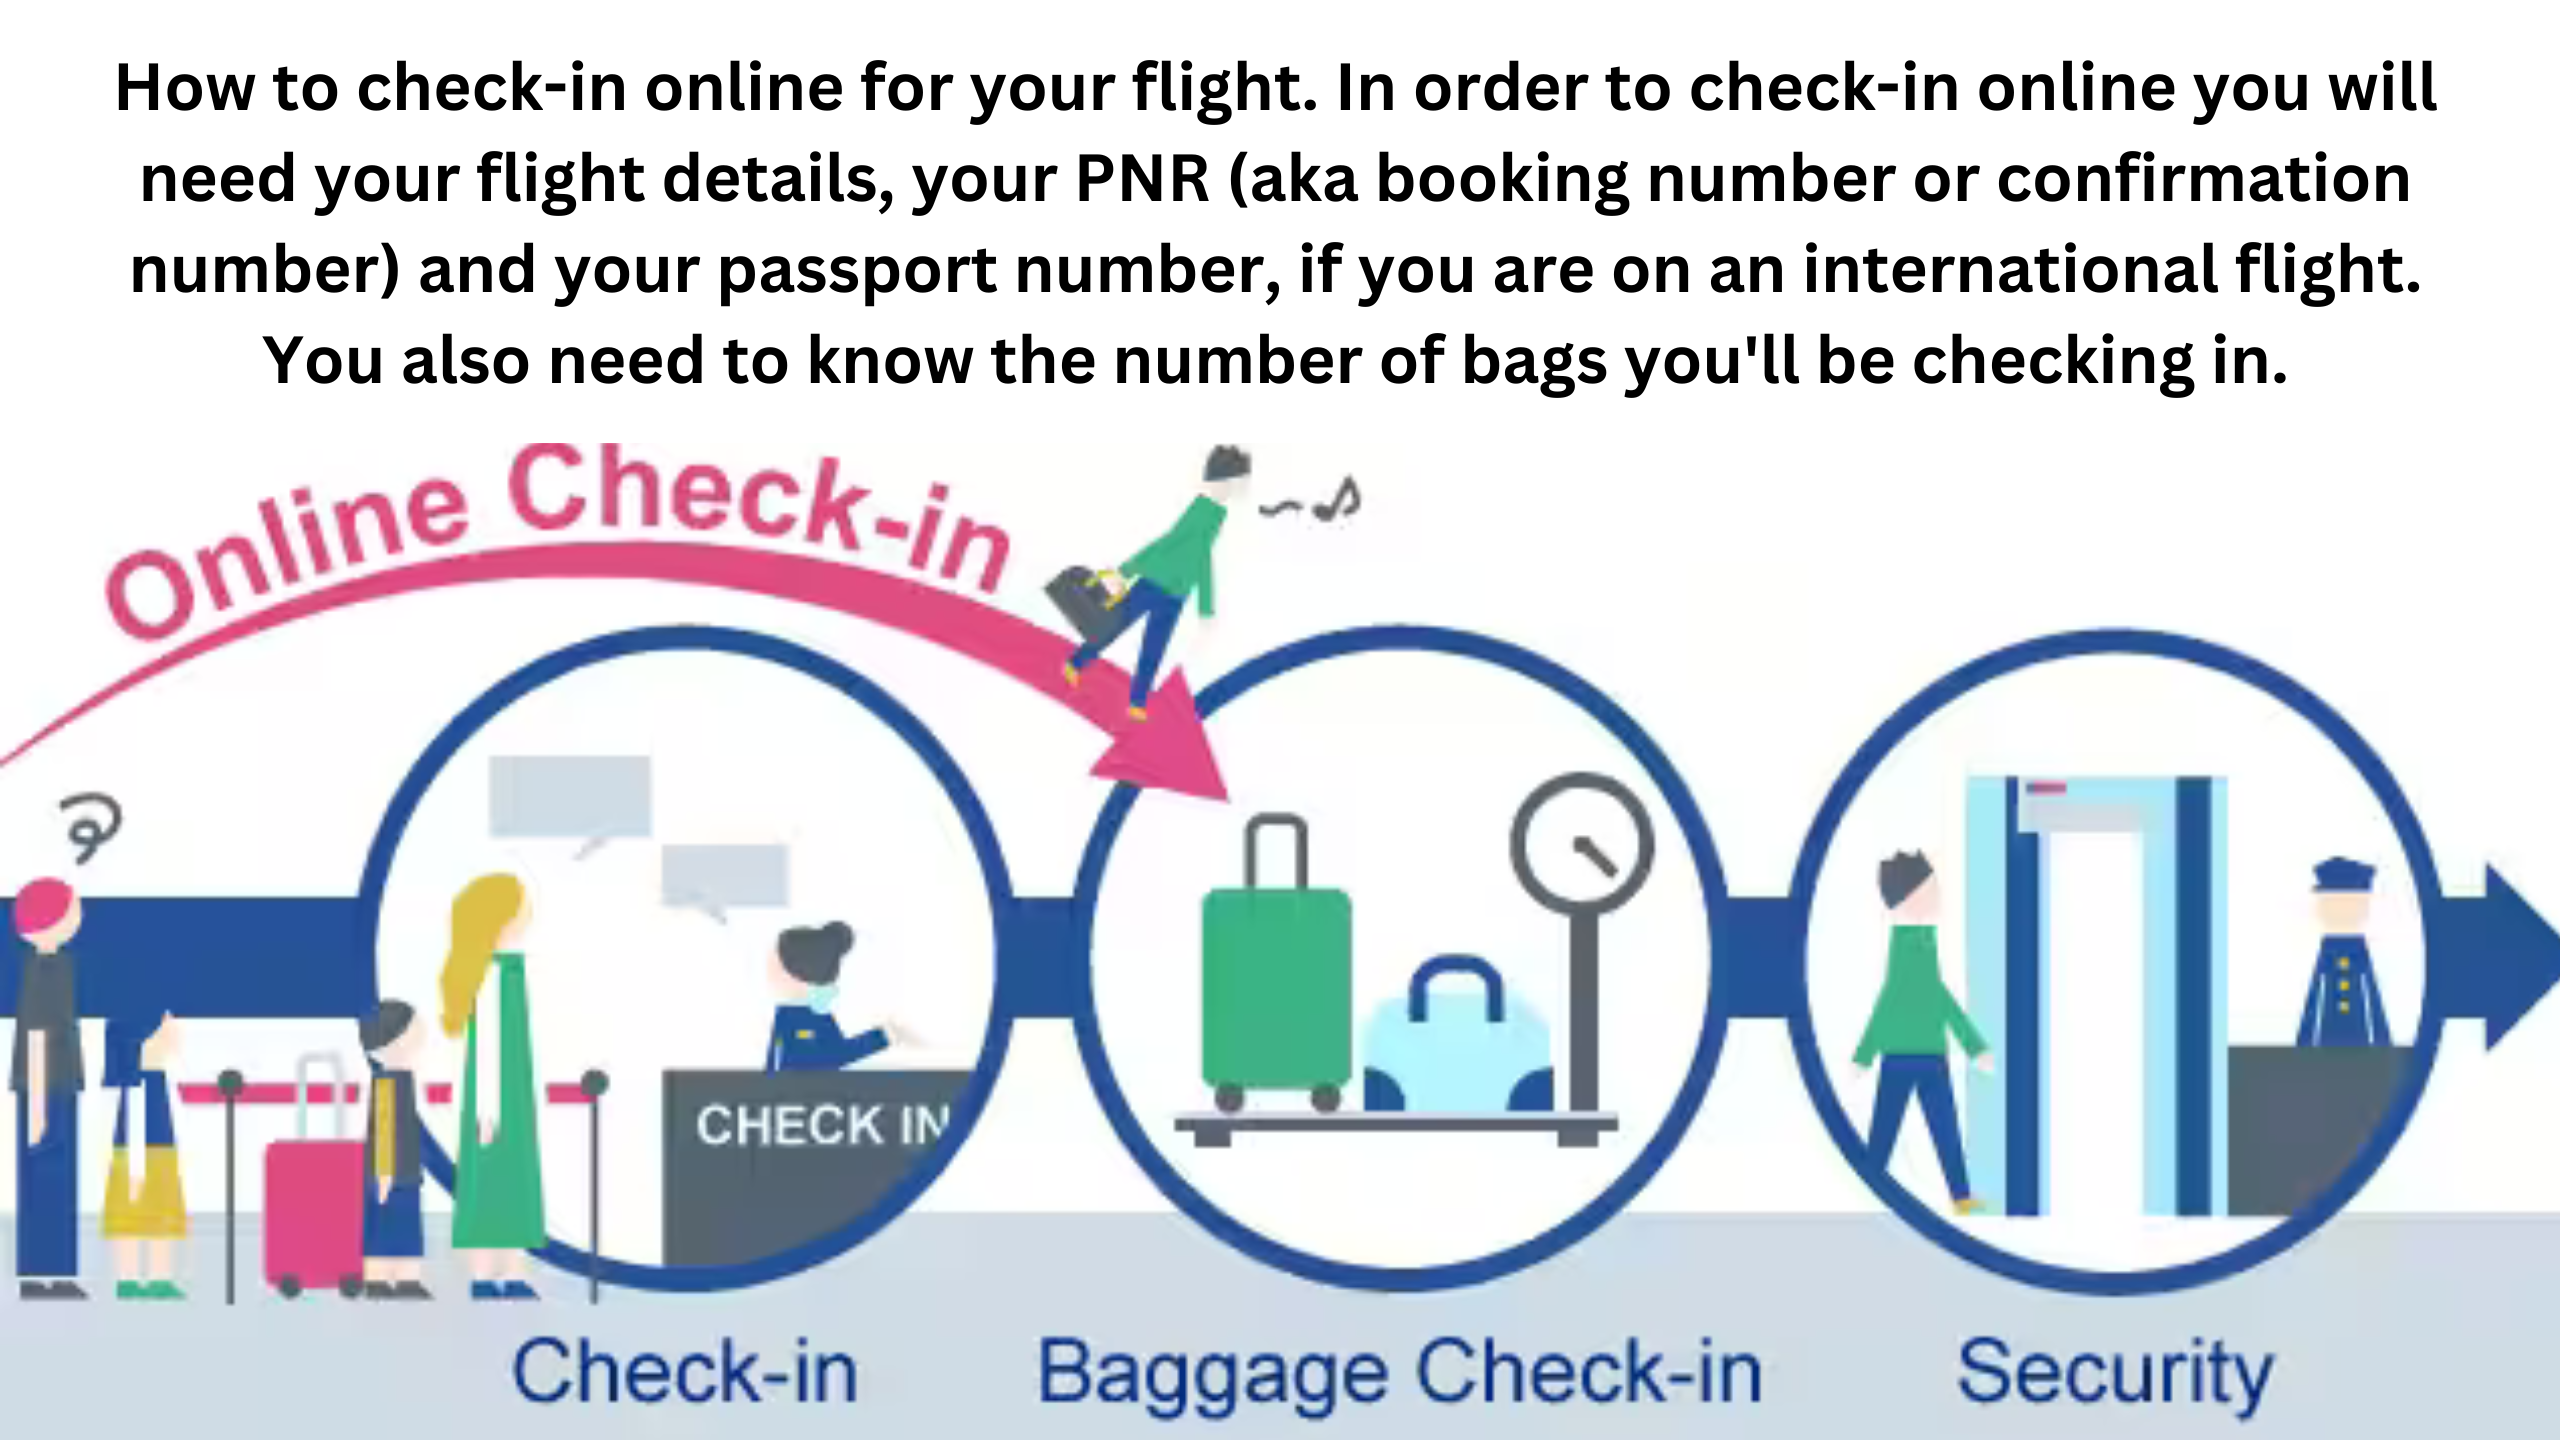 What Are the Requirements for Using Online Check-in?